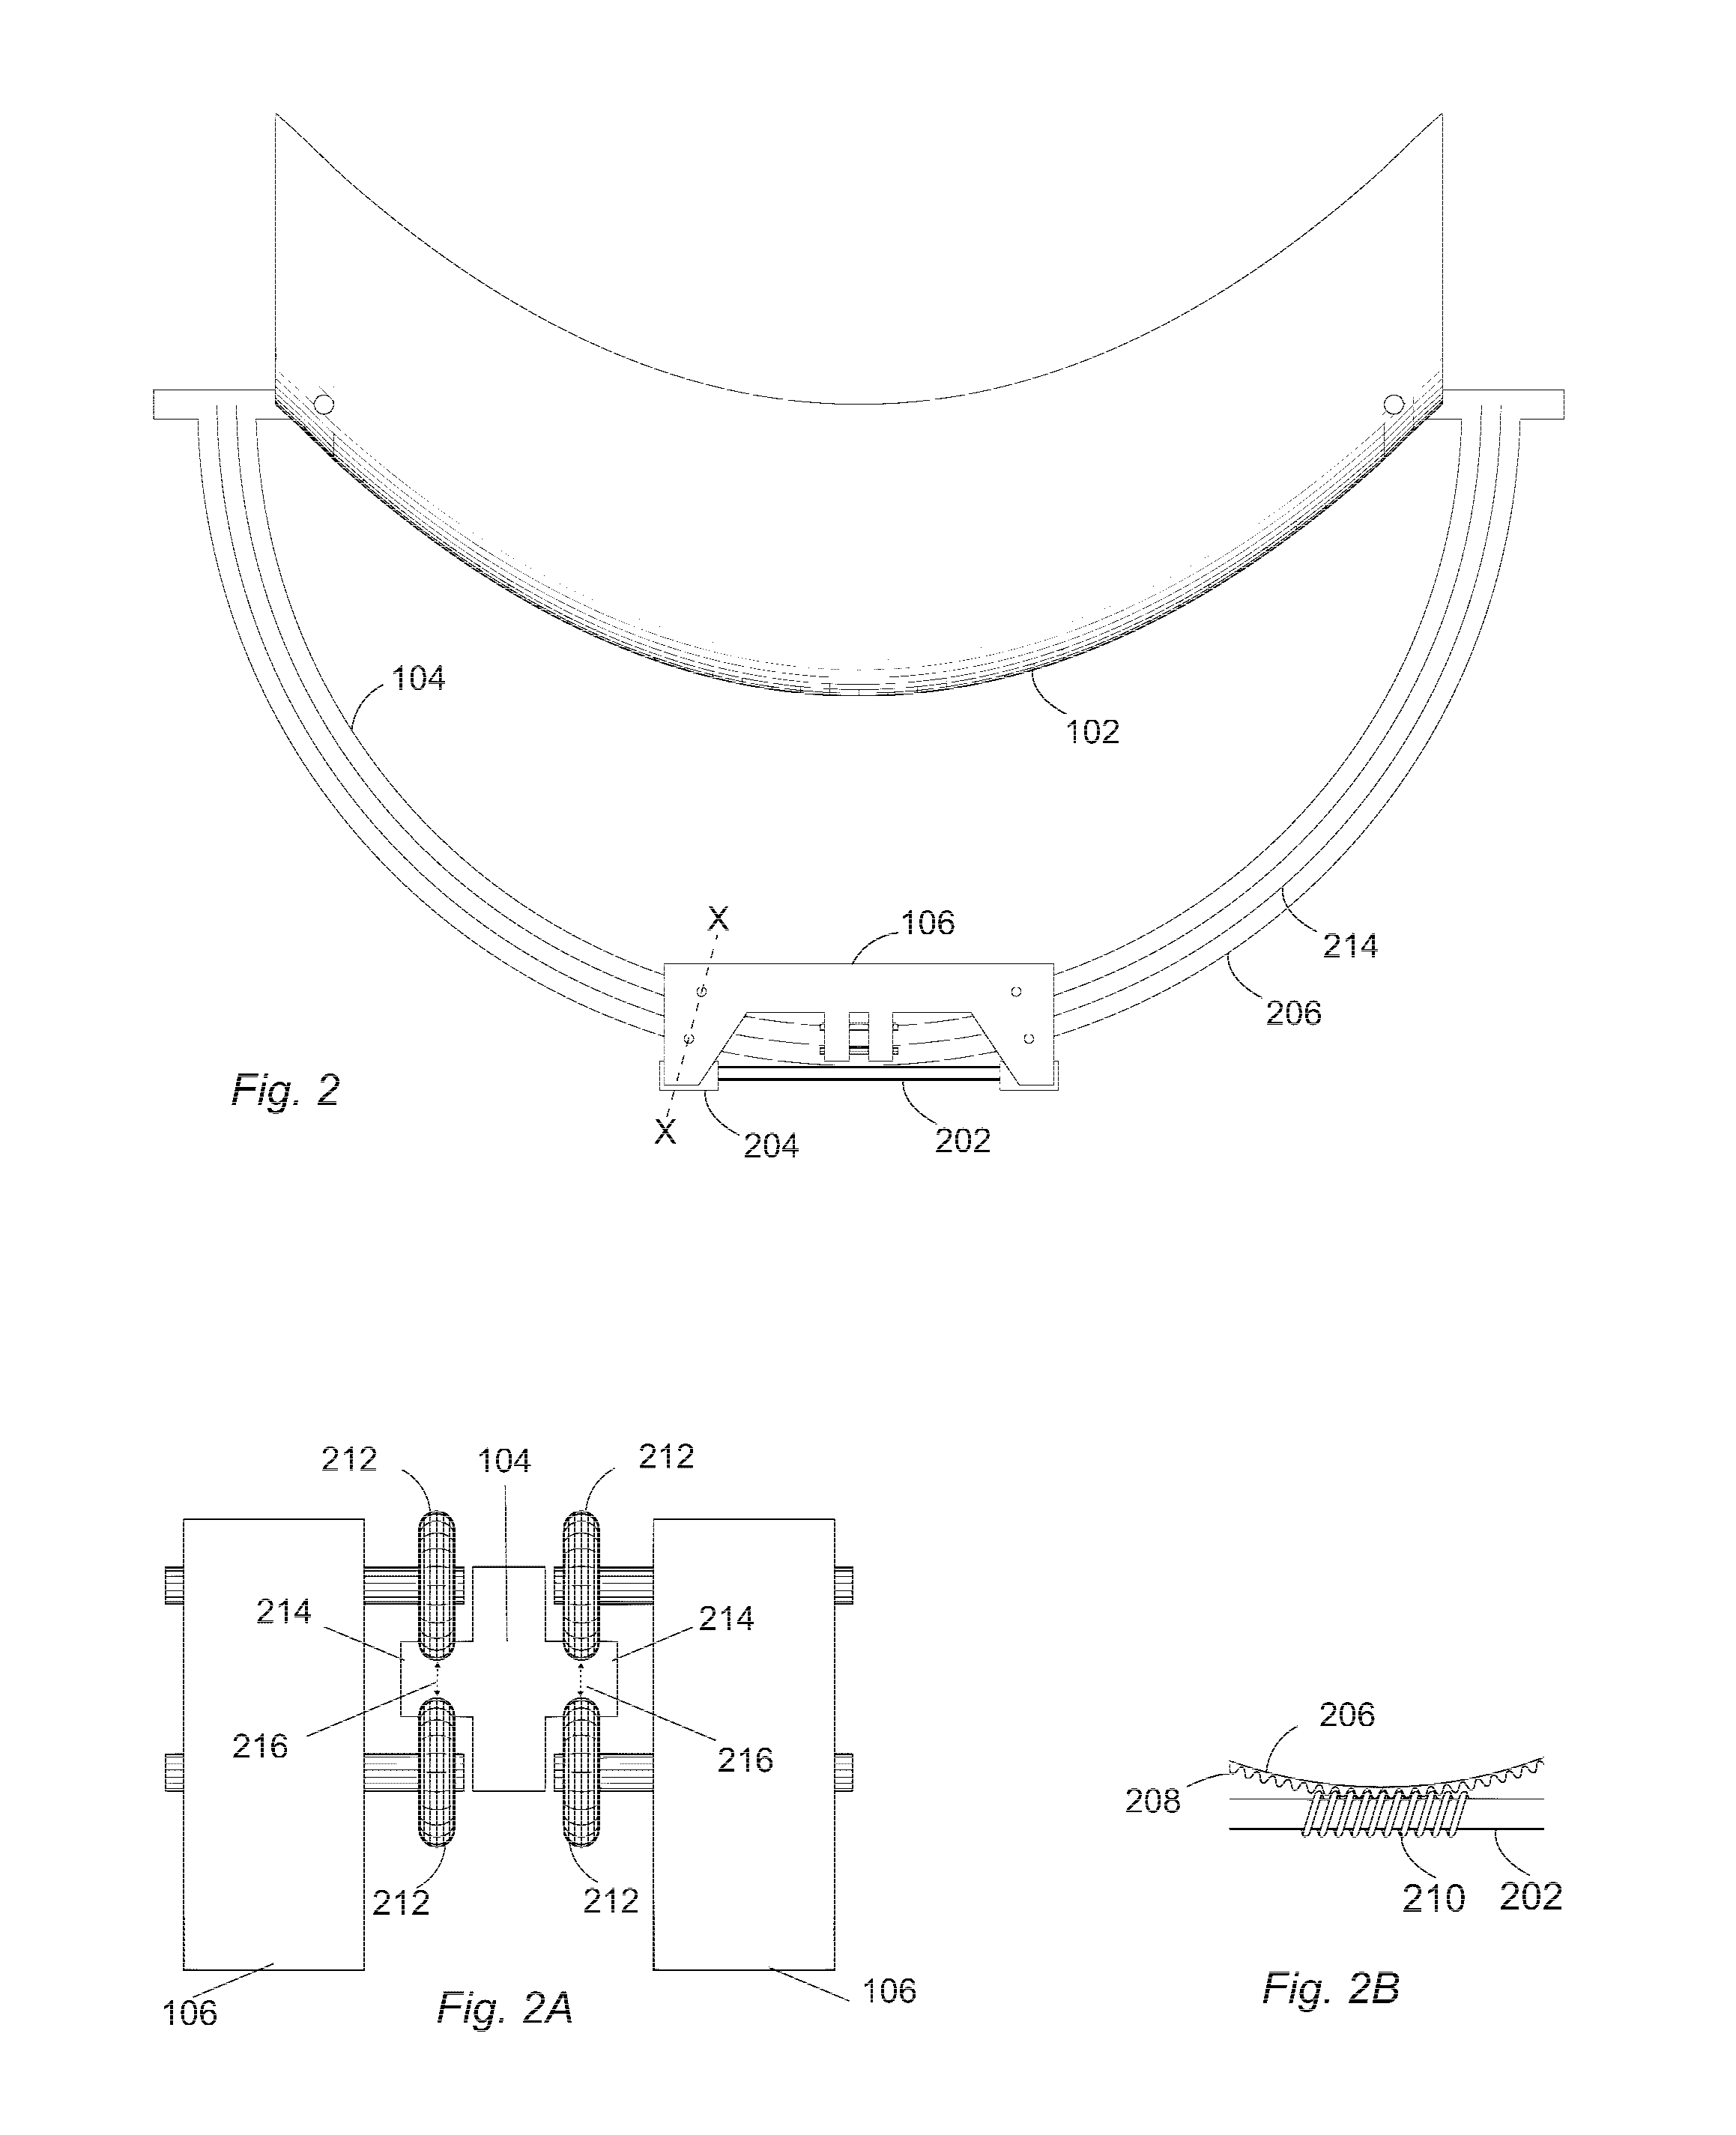 Apparatus and A Method for Solar Tracking and Concentration af Incident Solar Radiation for Power Generation